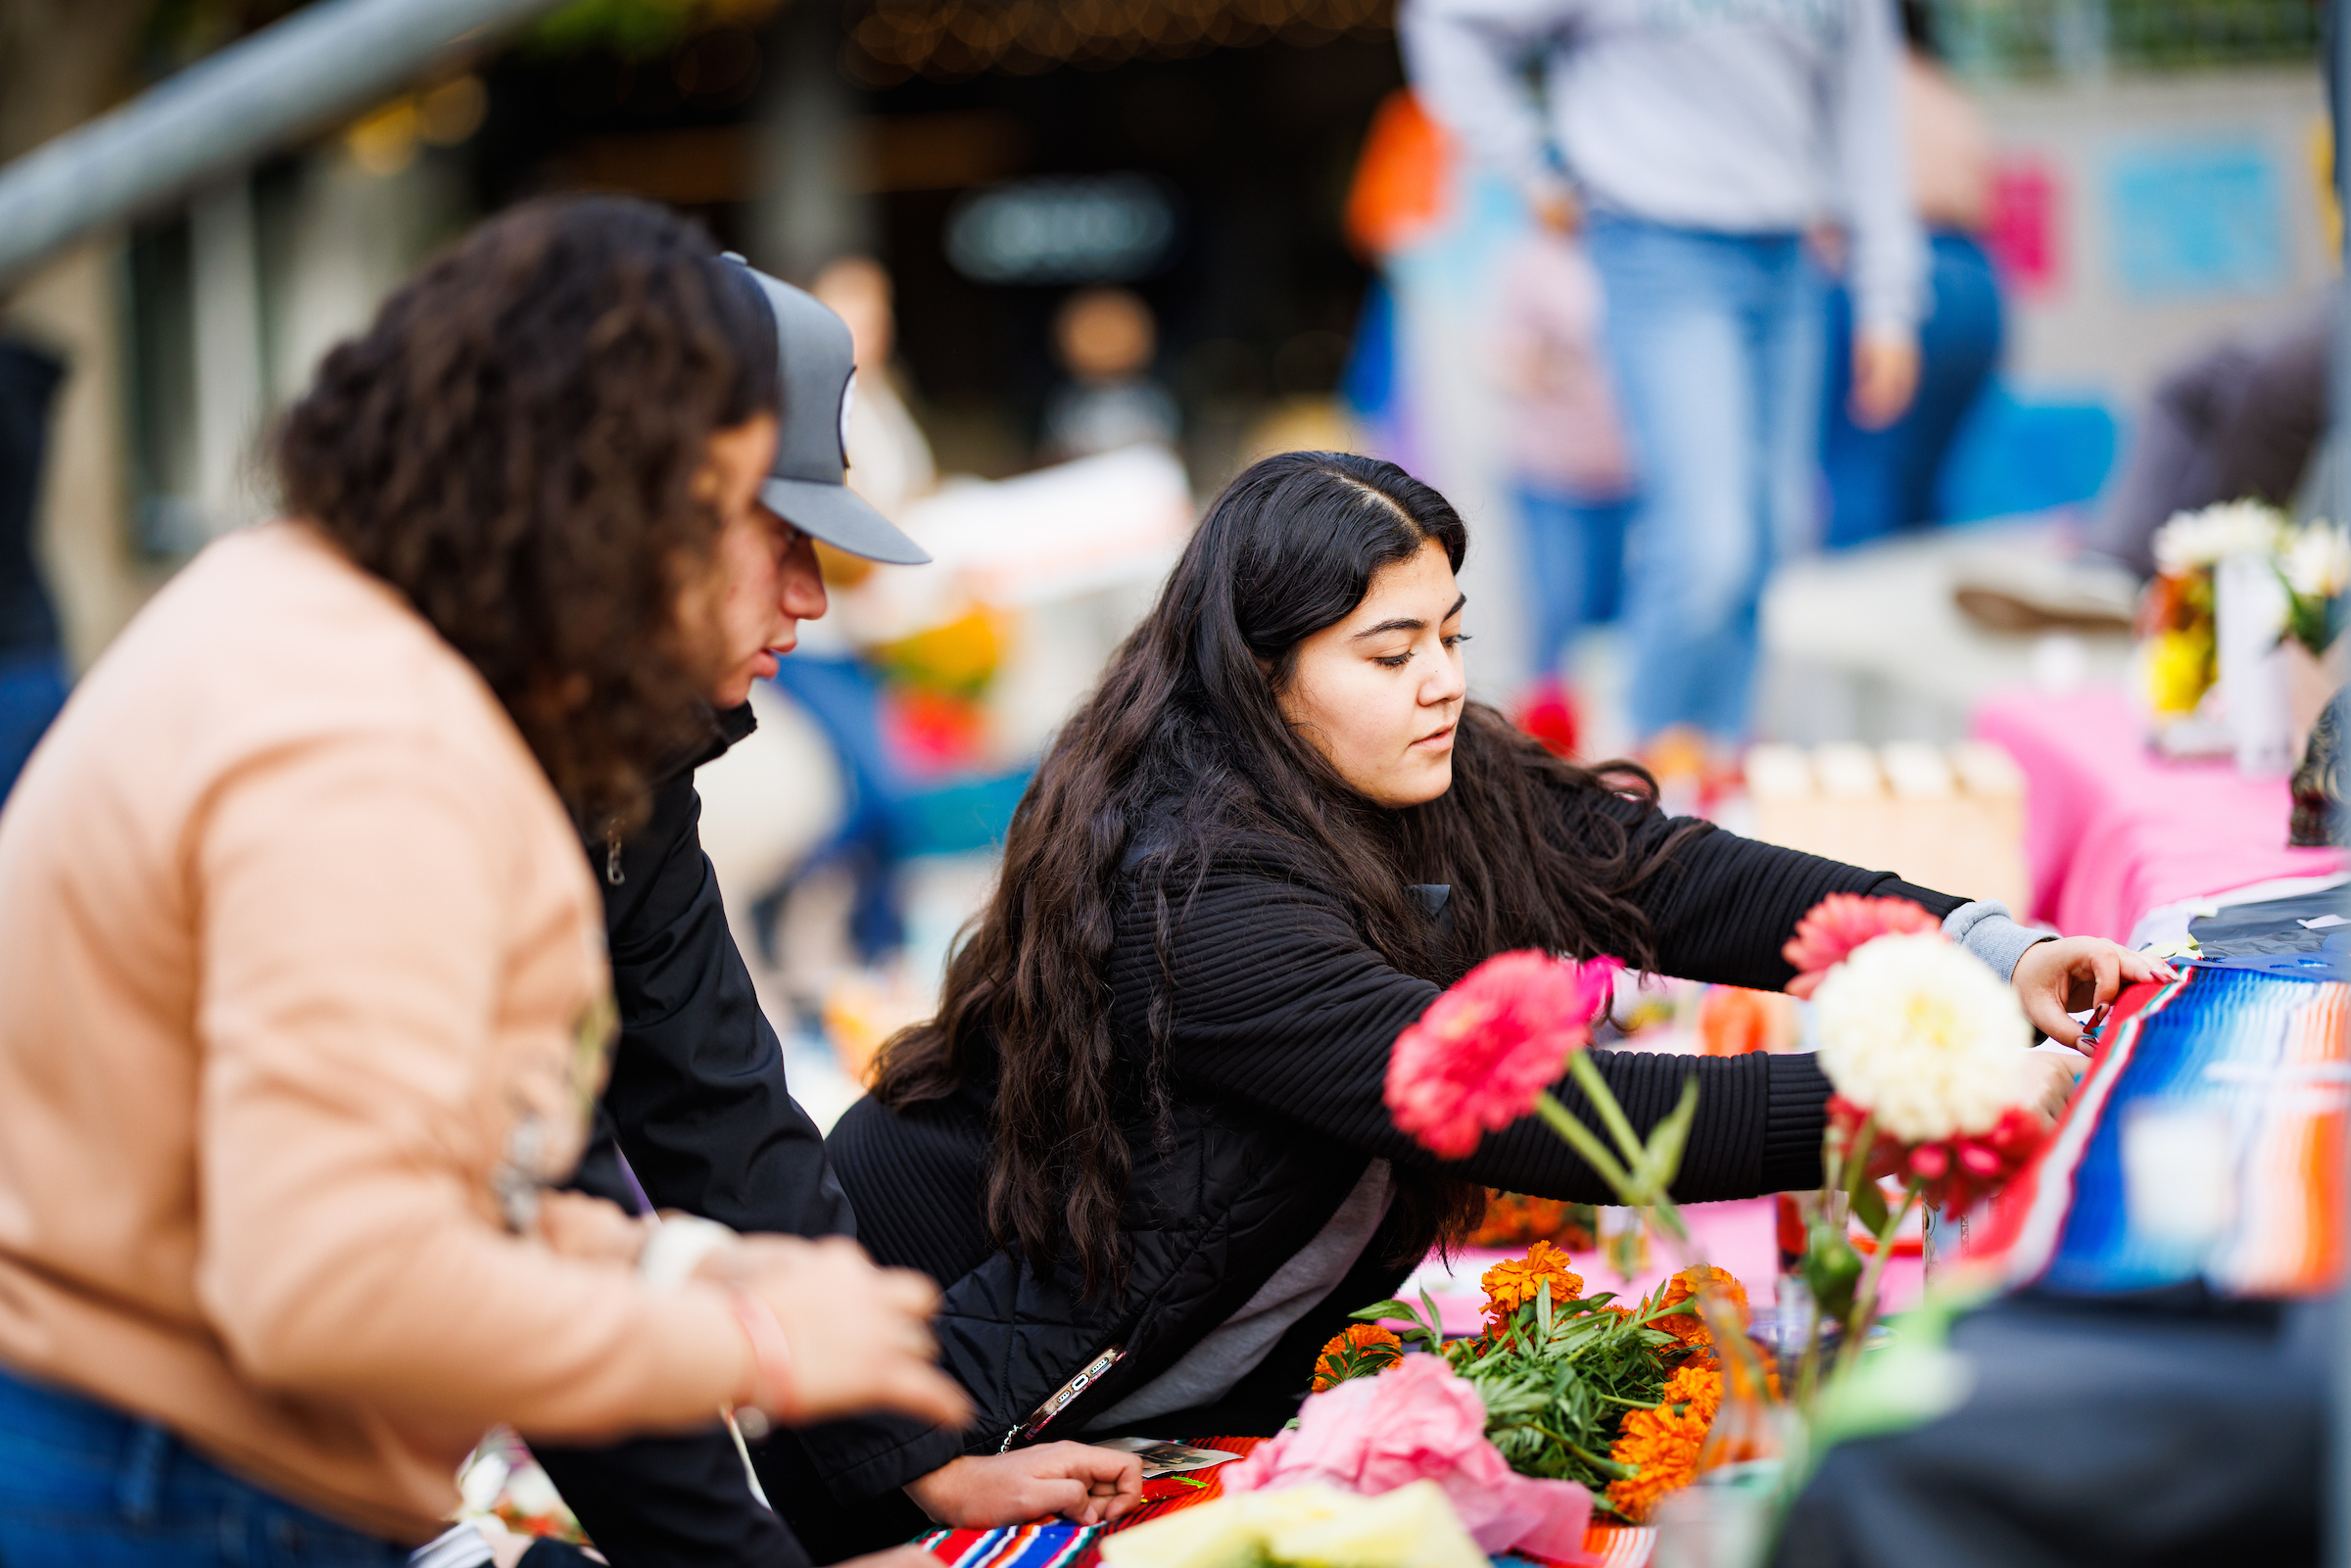 Students congregate at an ofrenda, or altar, for dia de los muertos in the university union plaza.